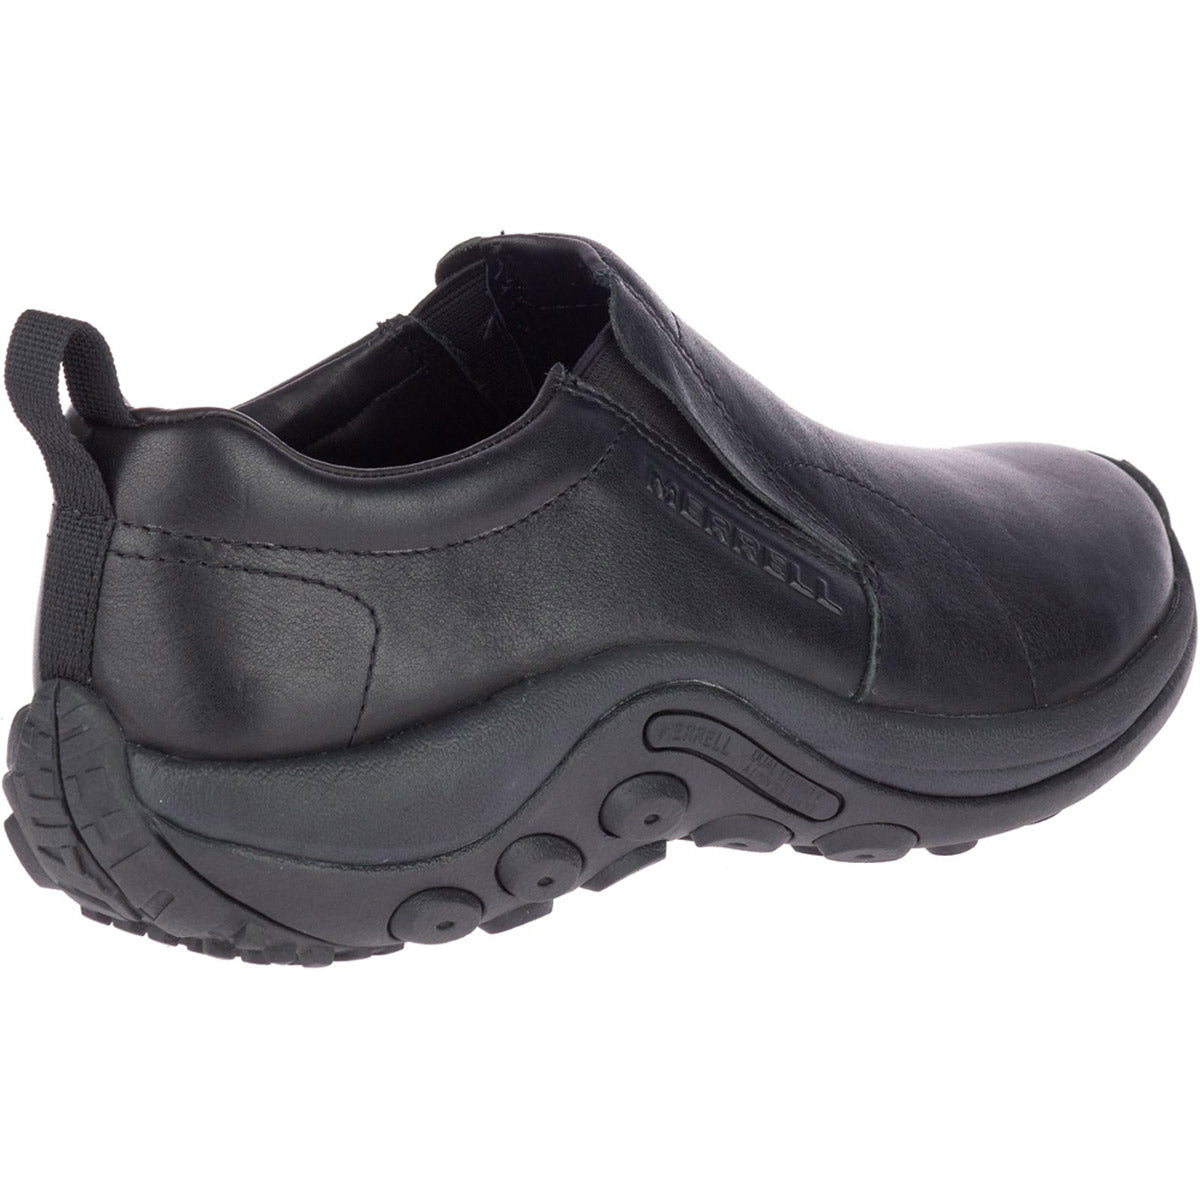 Black Merrell Jungle Moc Leather 2 slip-on casual shoe with a thick sole and Air Cushion.
Product Name: MERRELL JUNGLE MOC LEATHER 2 BLACK - MENS
Brand Name: Merrell